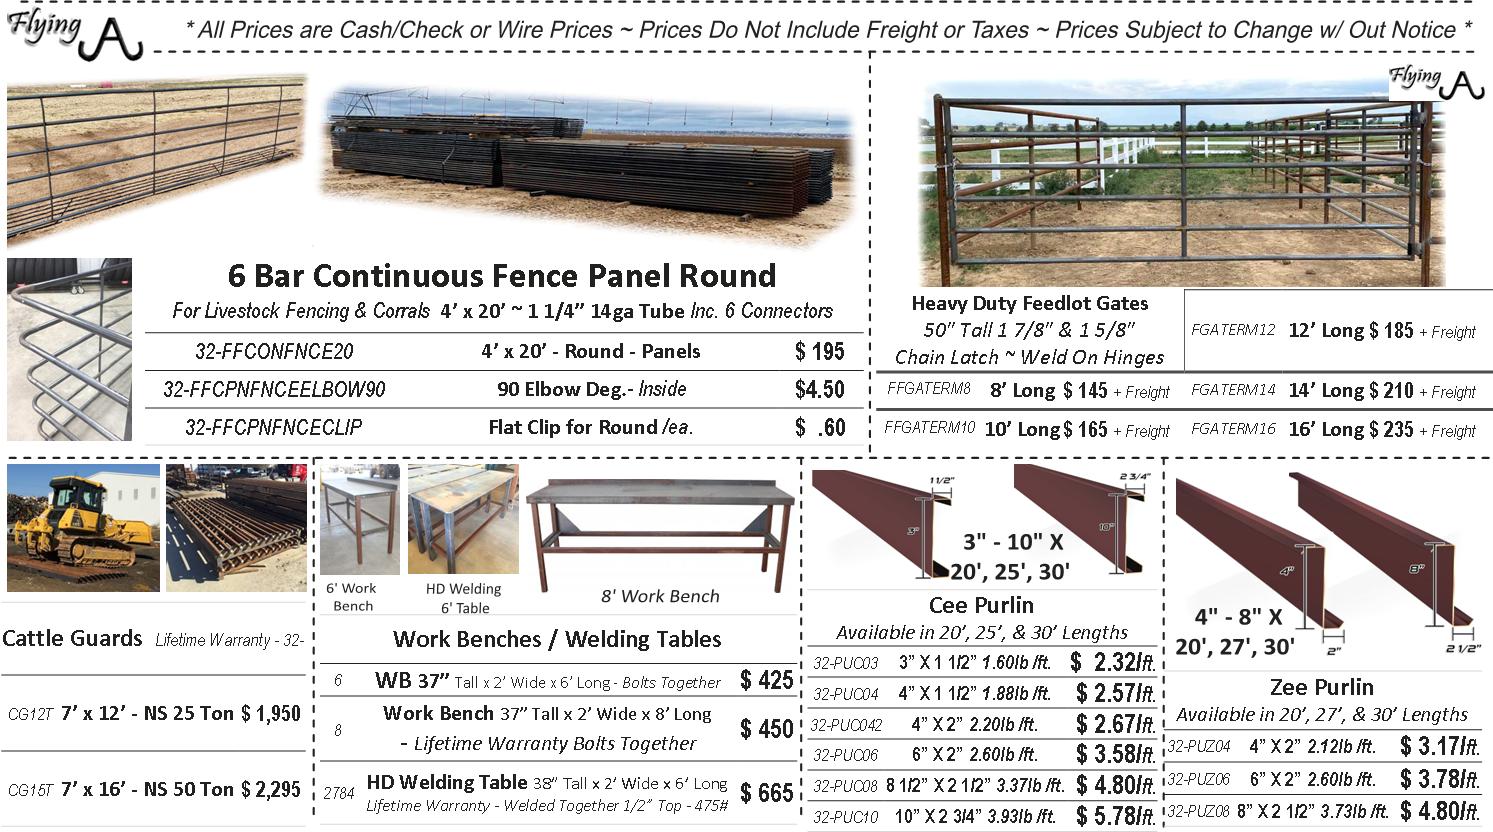 Flying A Continous Fence & Heavy Duty Corral Gates